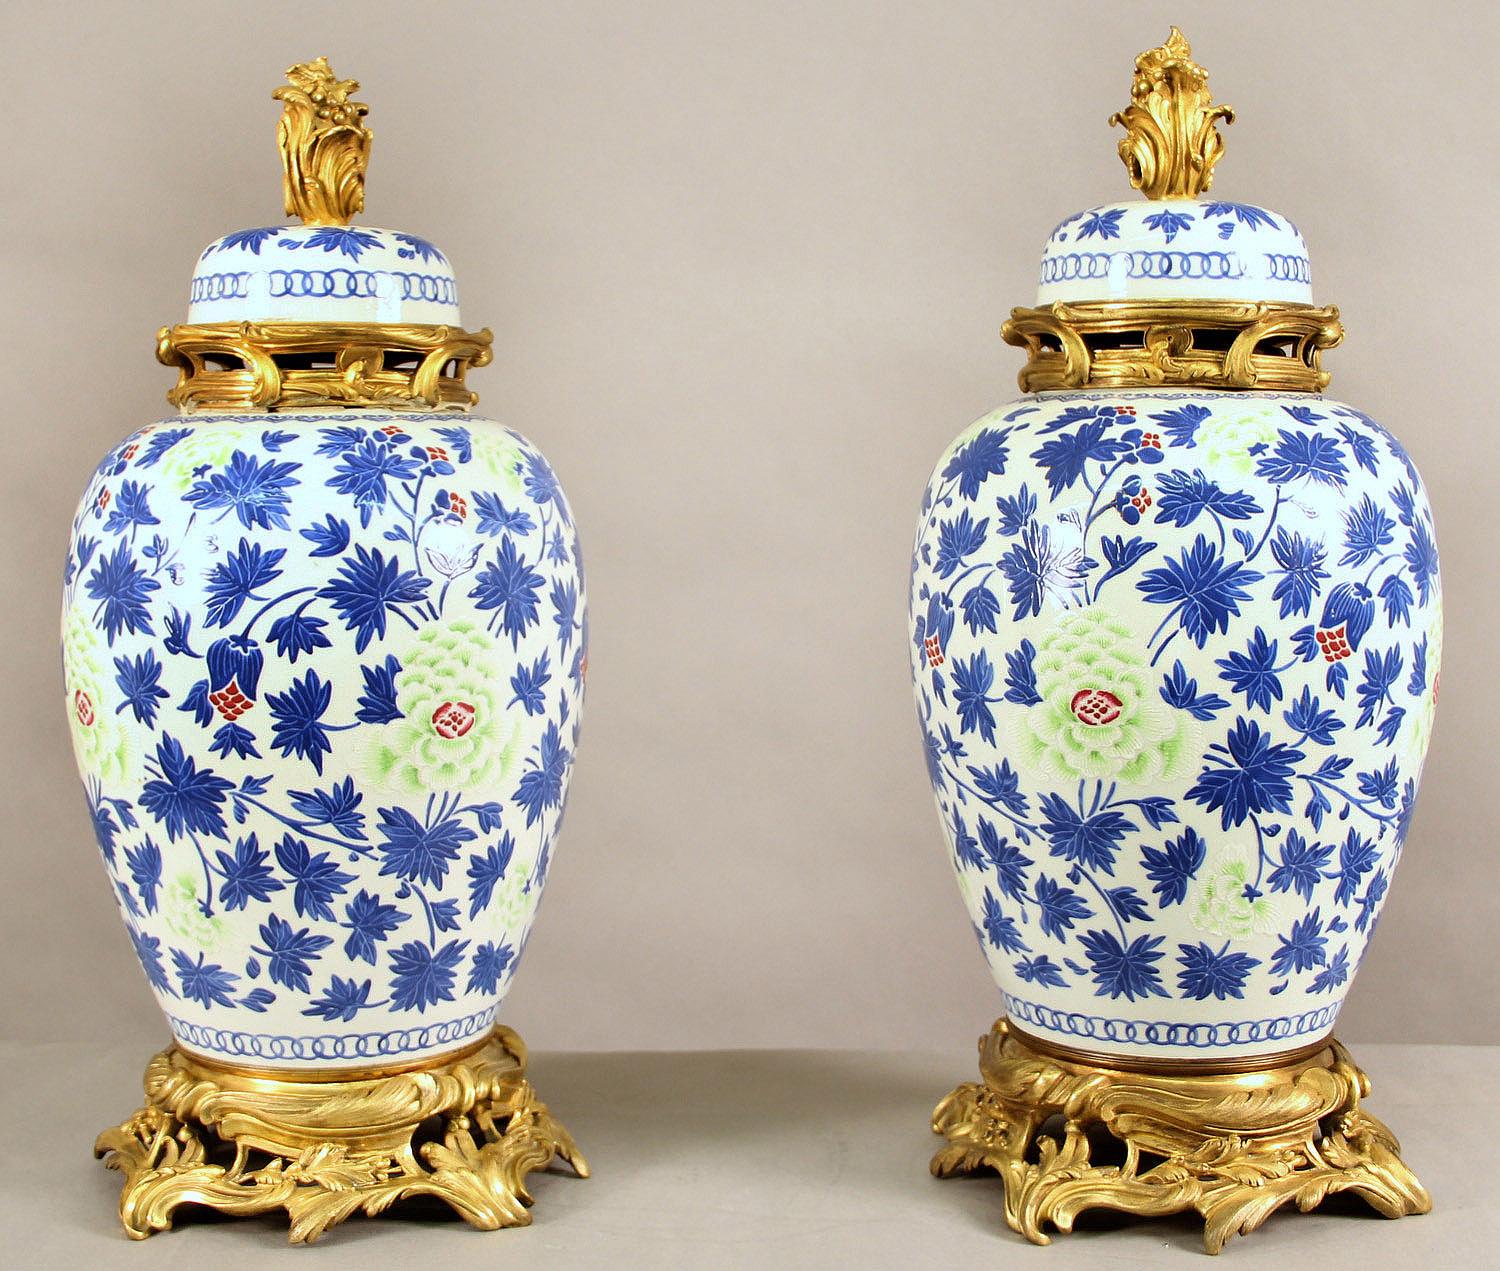 A wonderful pair of late 19th century gilt bronze mounted continental vases in Chinese Style

The vases painted with floral designs in beautiful blue, green and red colors, sitting on a gilt bronze base.
 